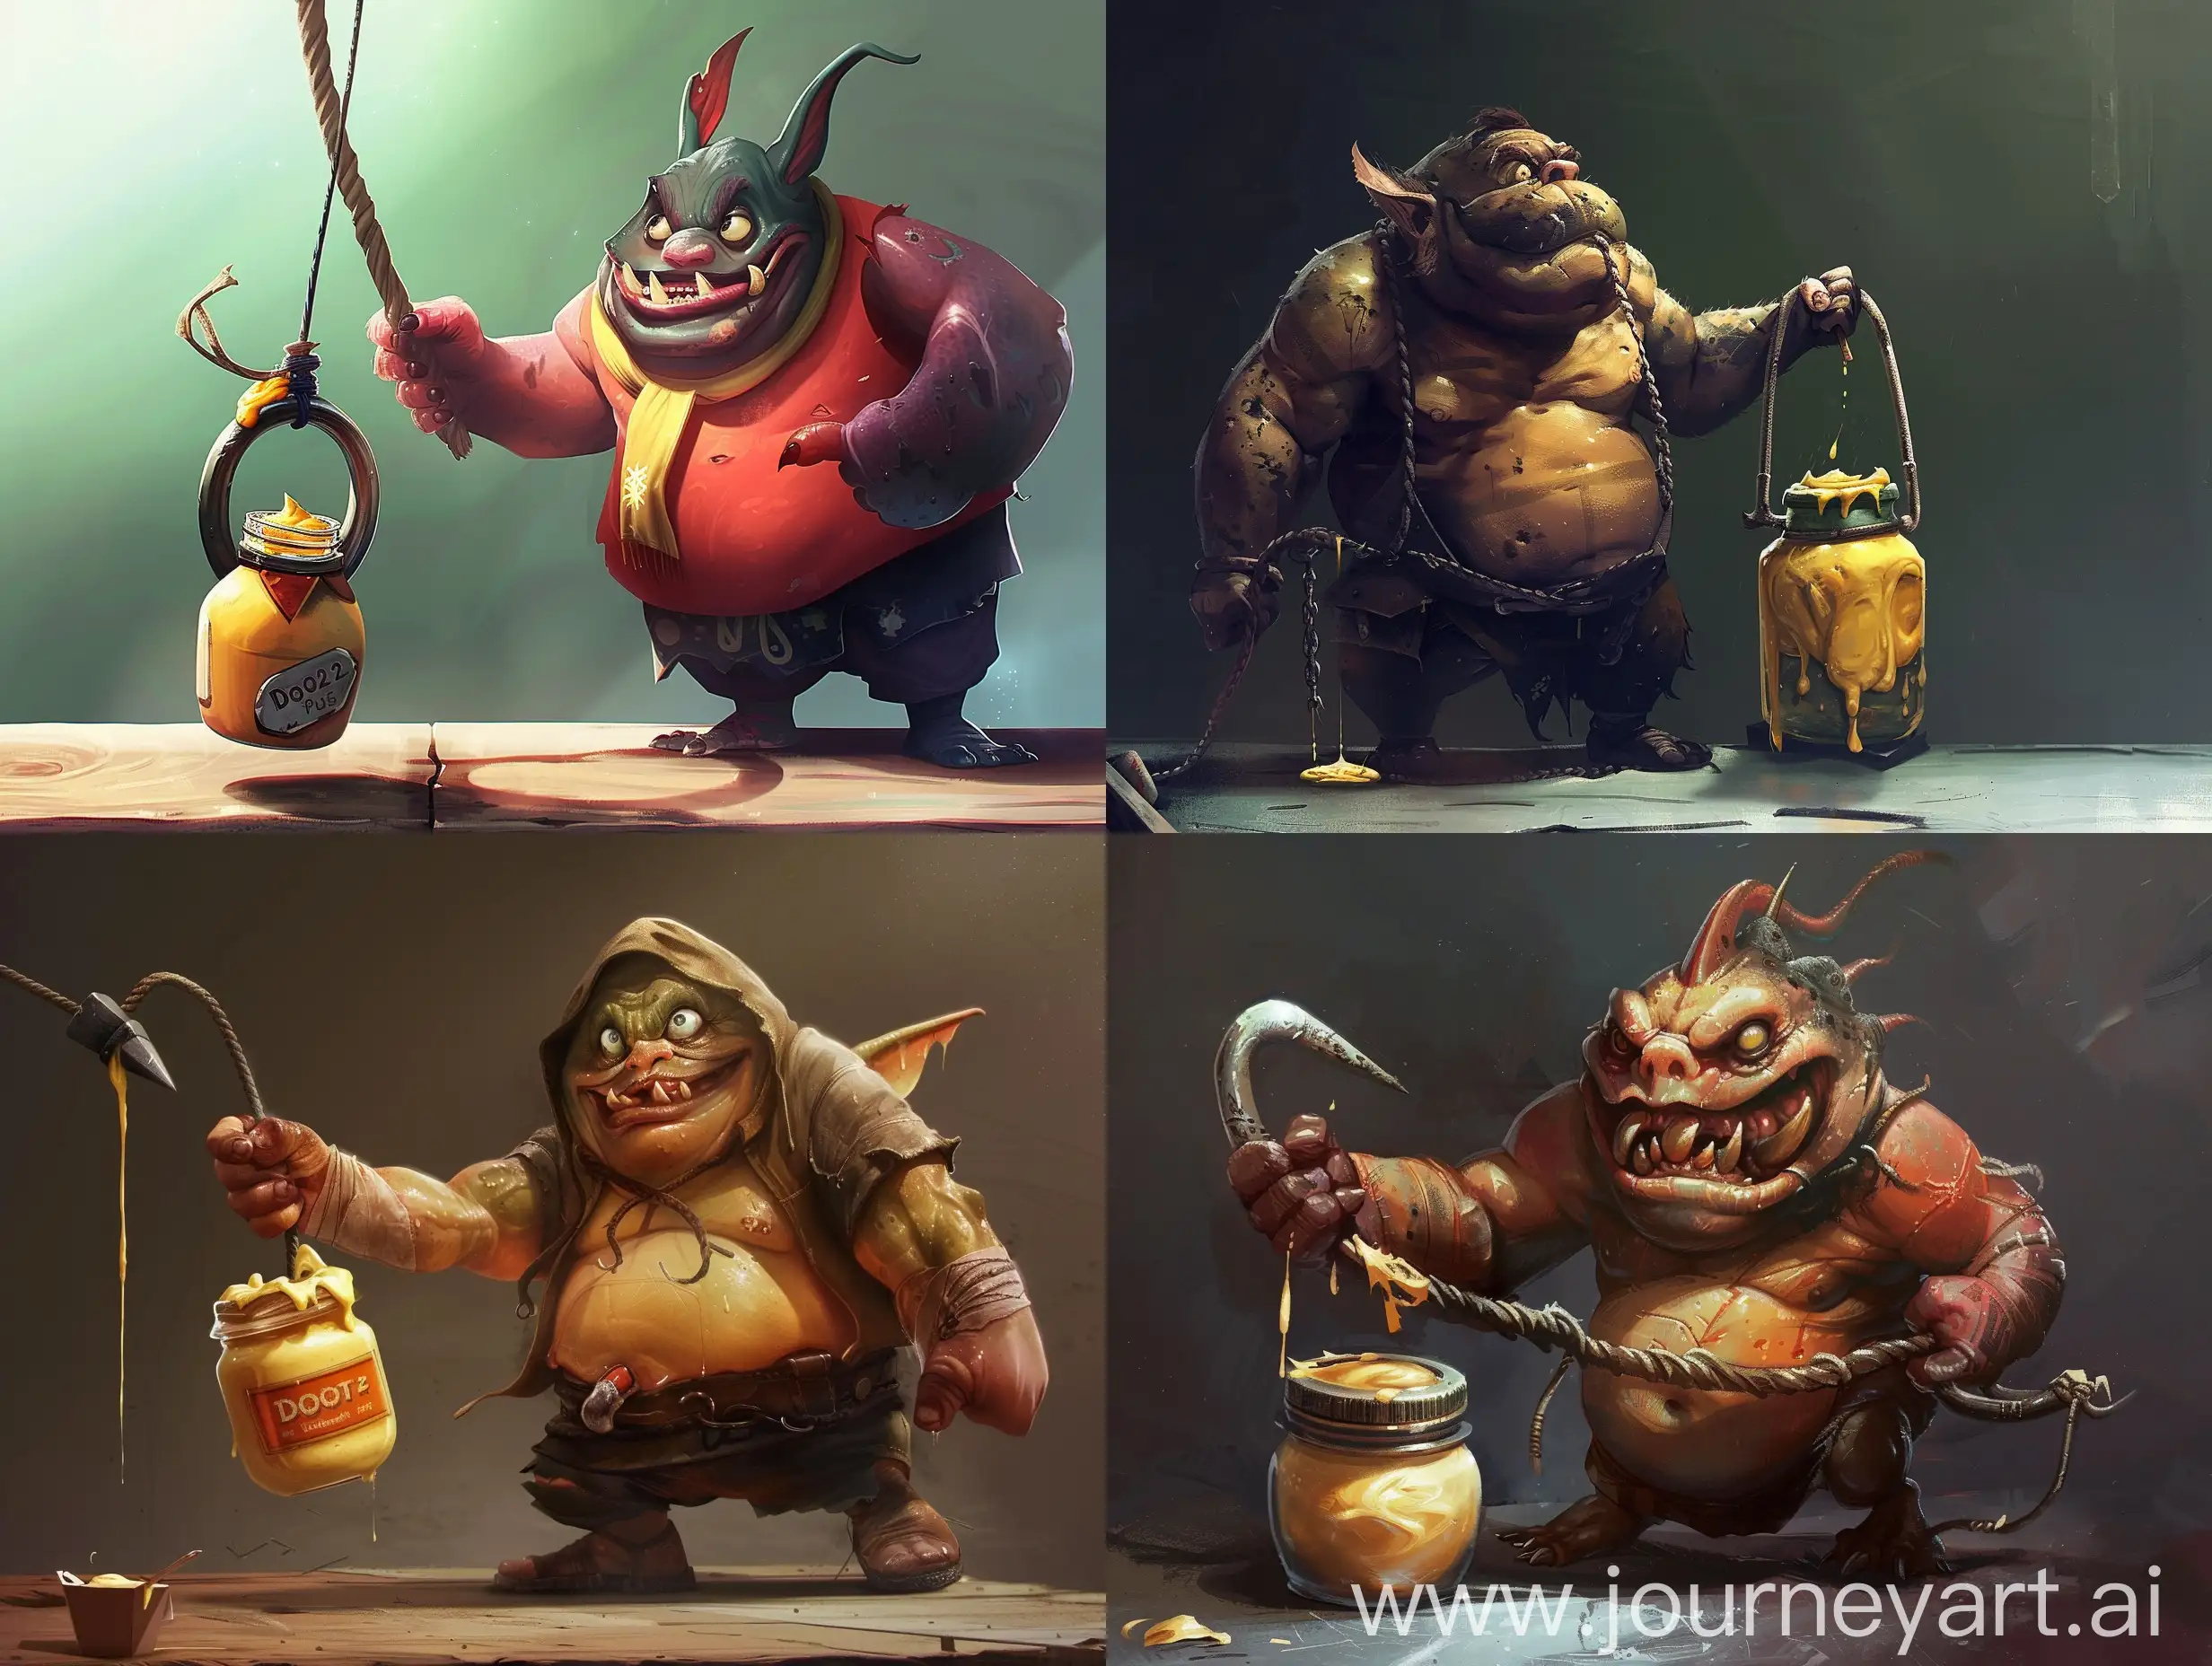 Pudge from dota 2 tries to pull a jar of mayonaisse with a huge hook. Photorealistic, dota 2 style, full hd